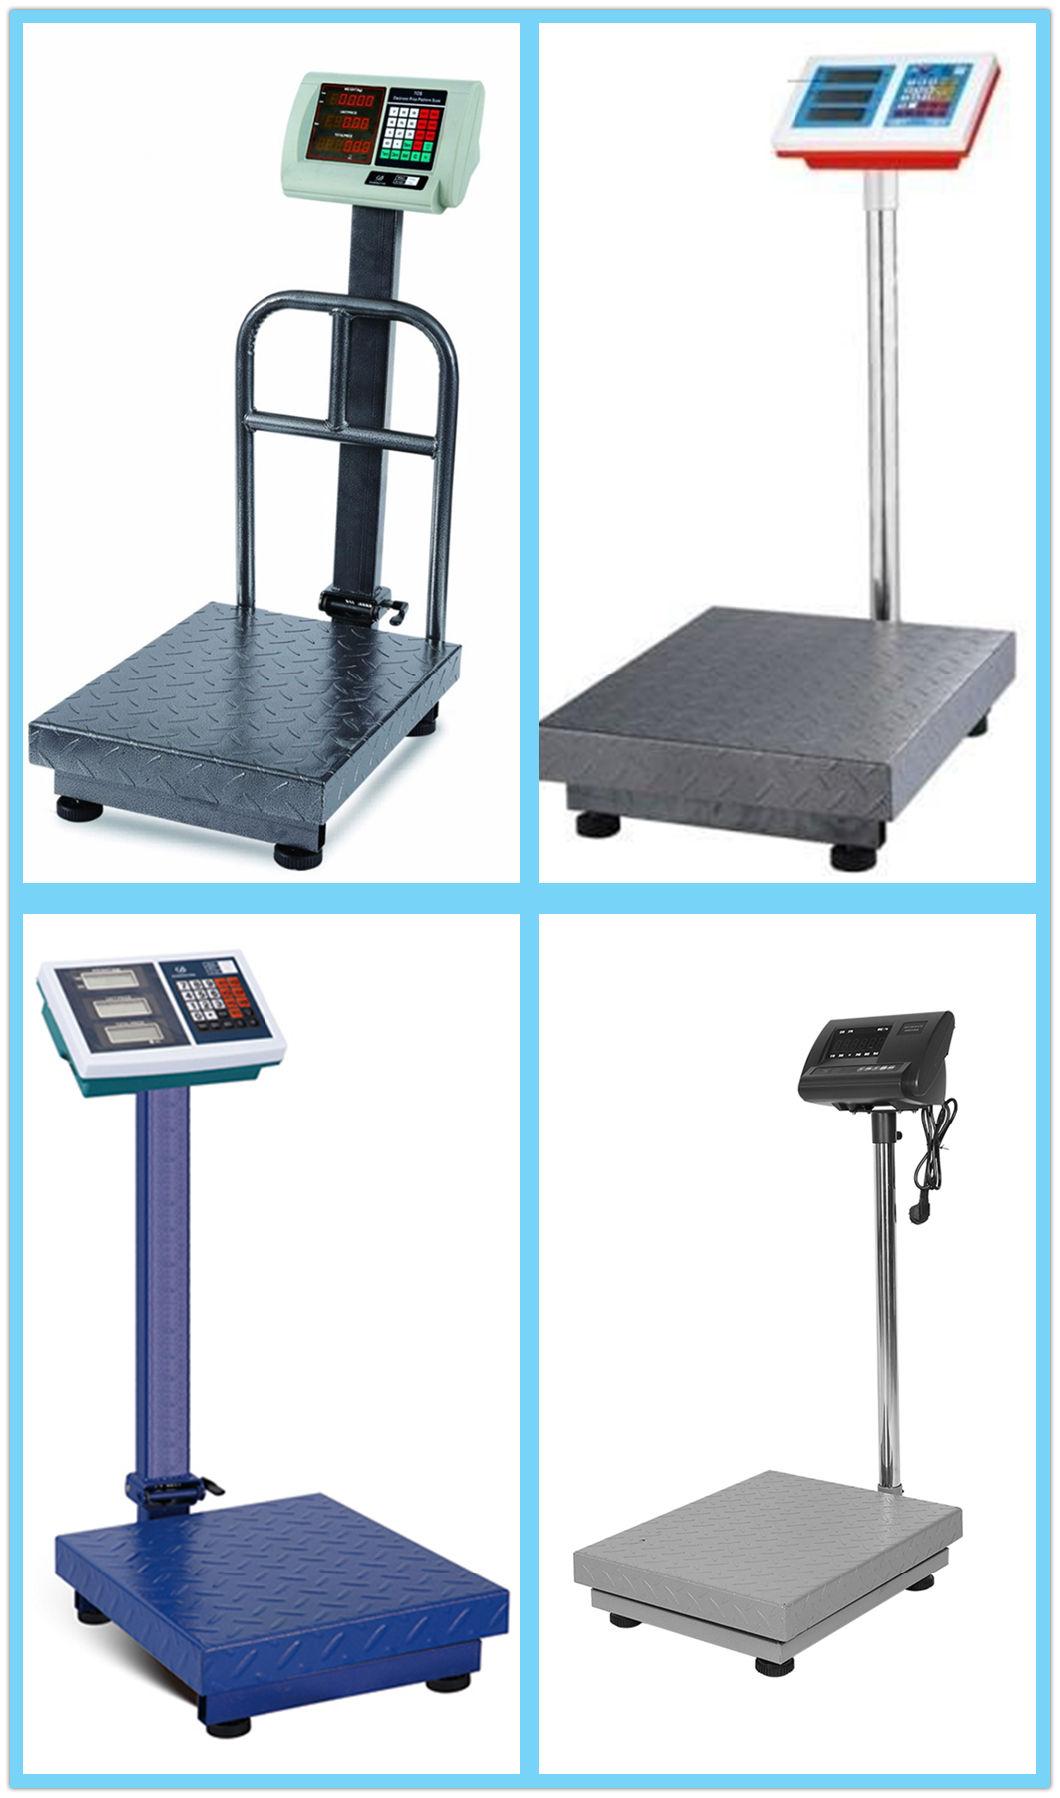 High Stainless Steel Degree Weighing Platform Scale Digital LCD Display Bench Scale